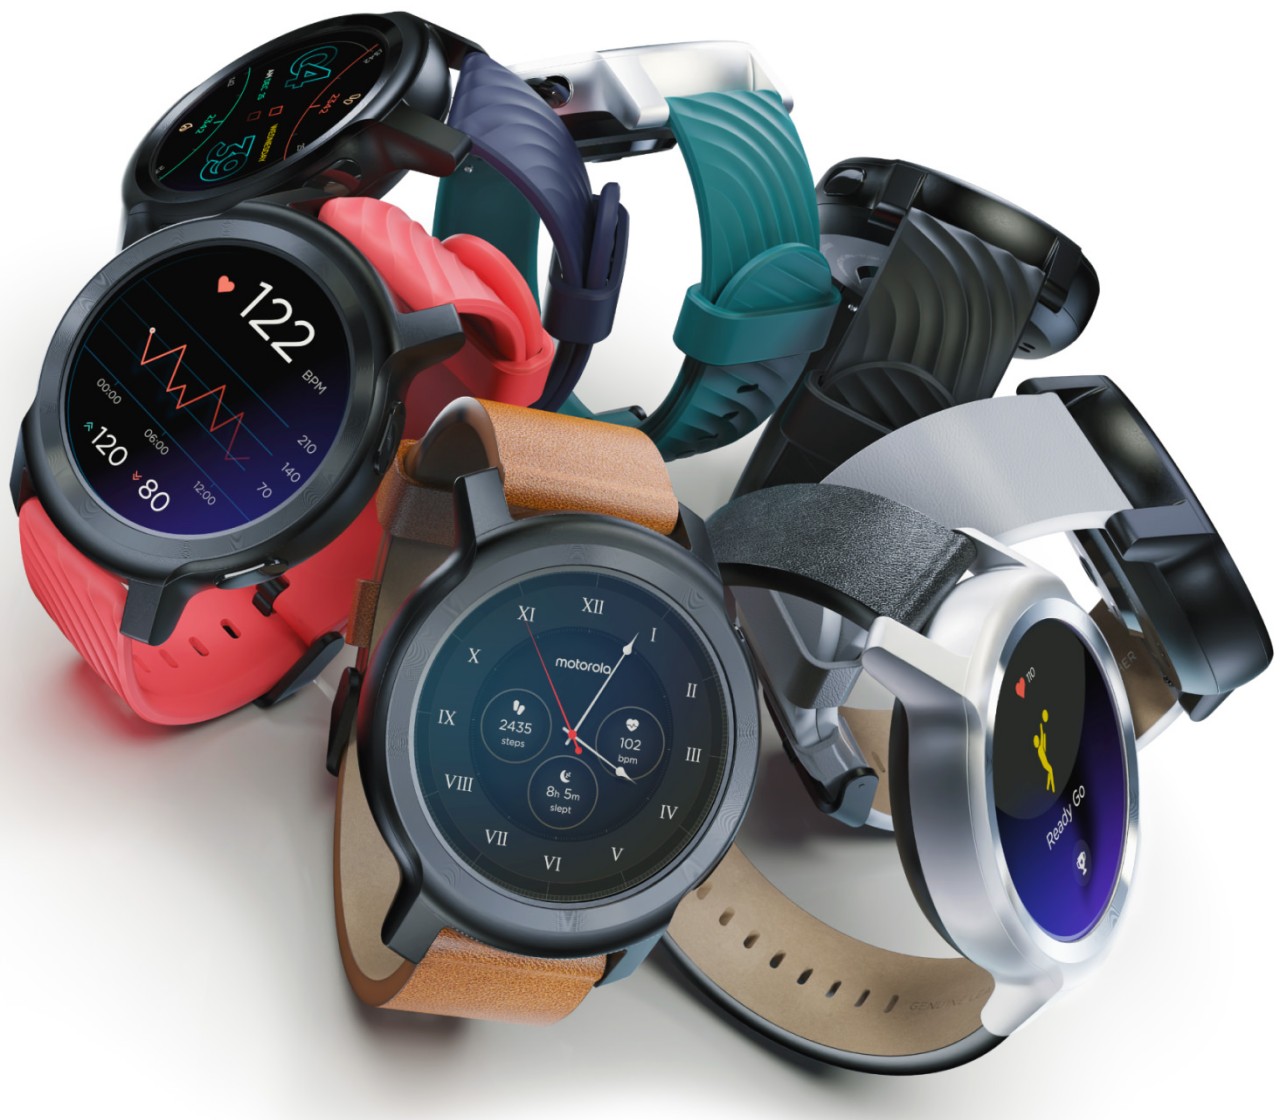 moto watch 100 is a low-cost smartwatch for safety-conscious families